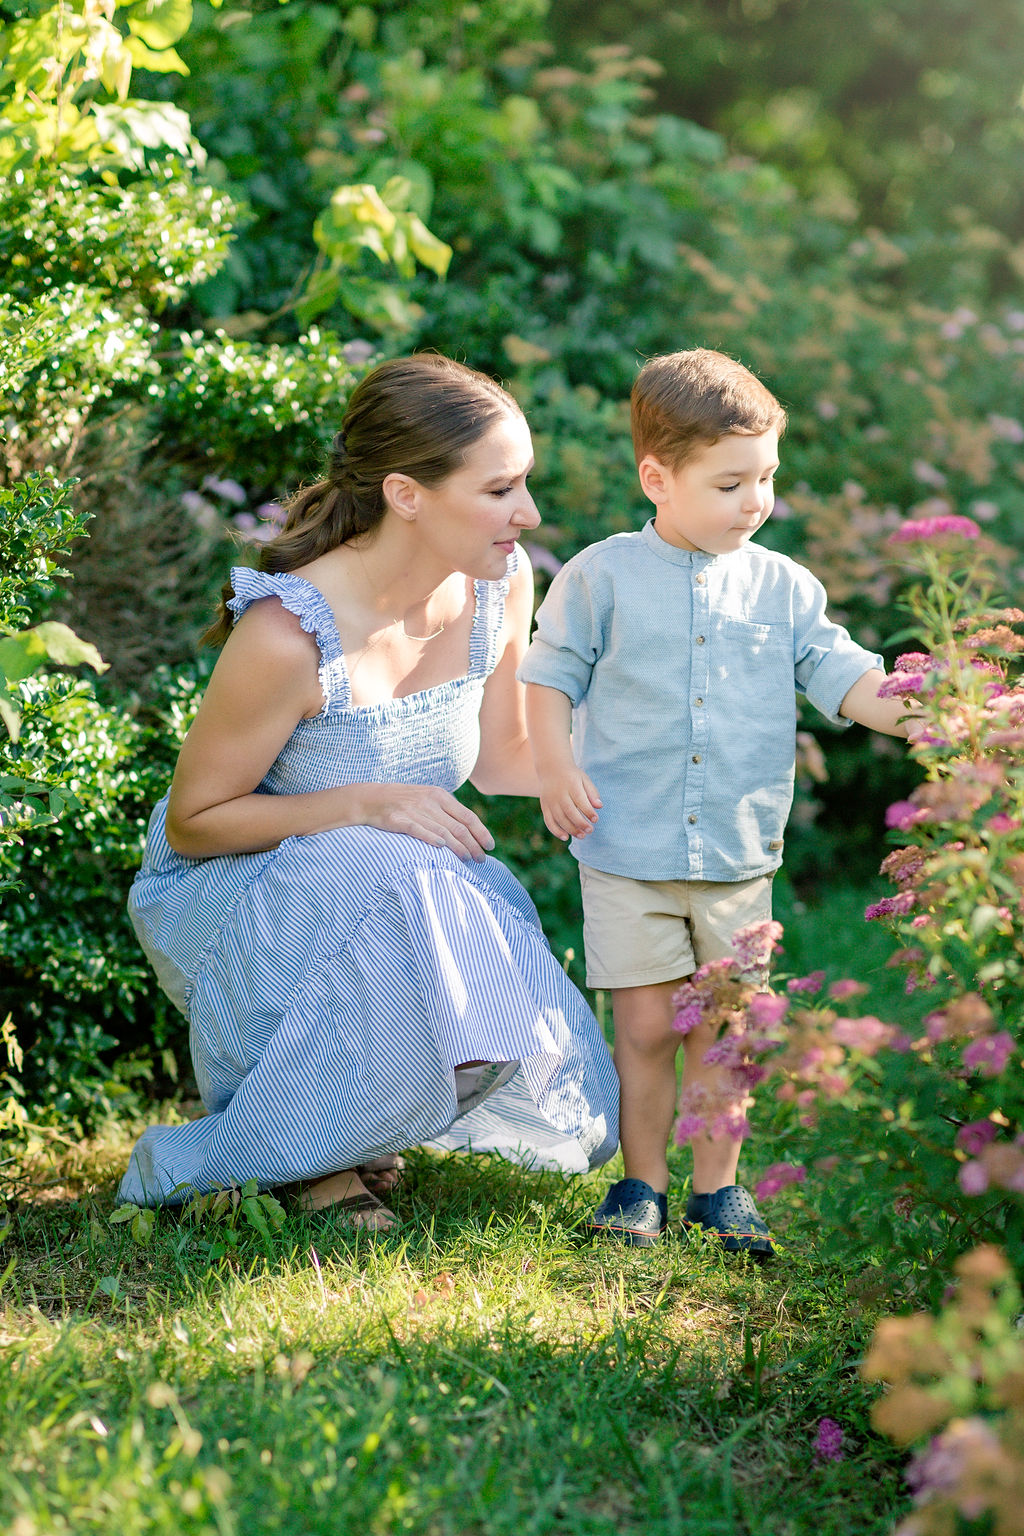 A mother and son explore a flower garden path with pink and white flowers